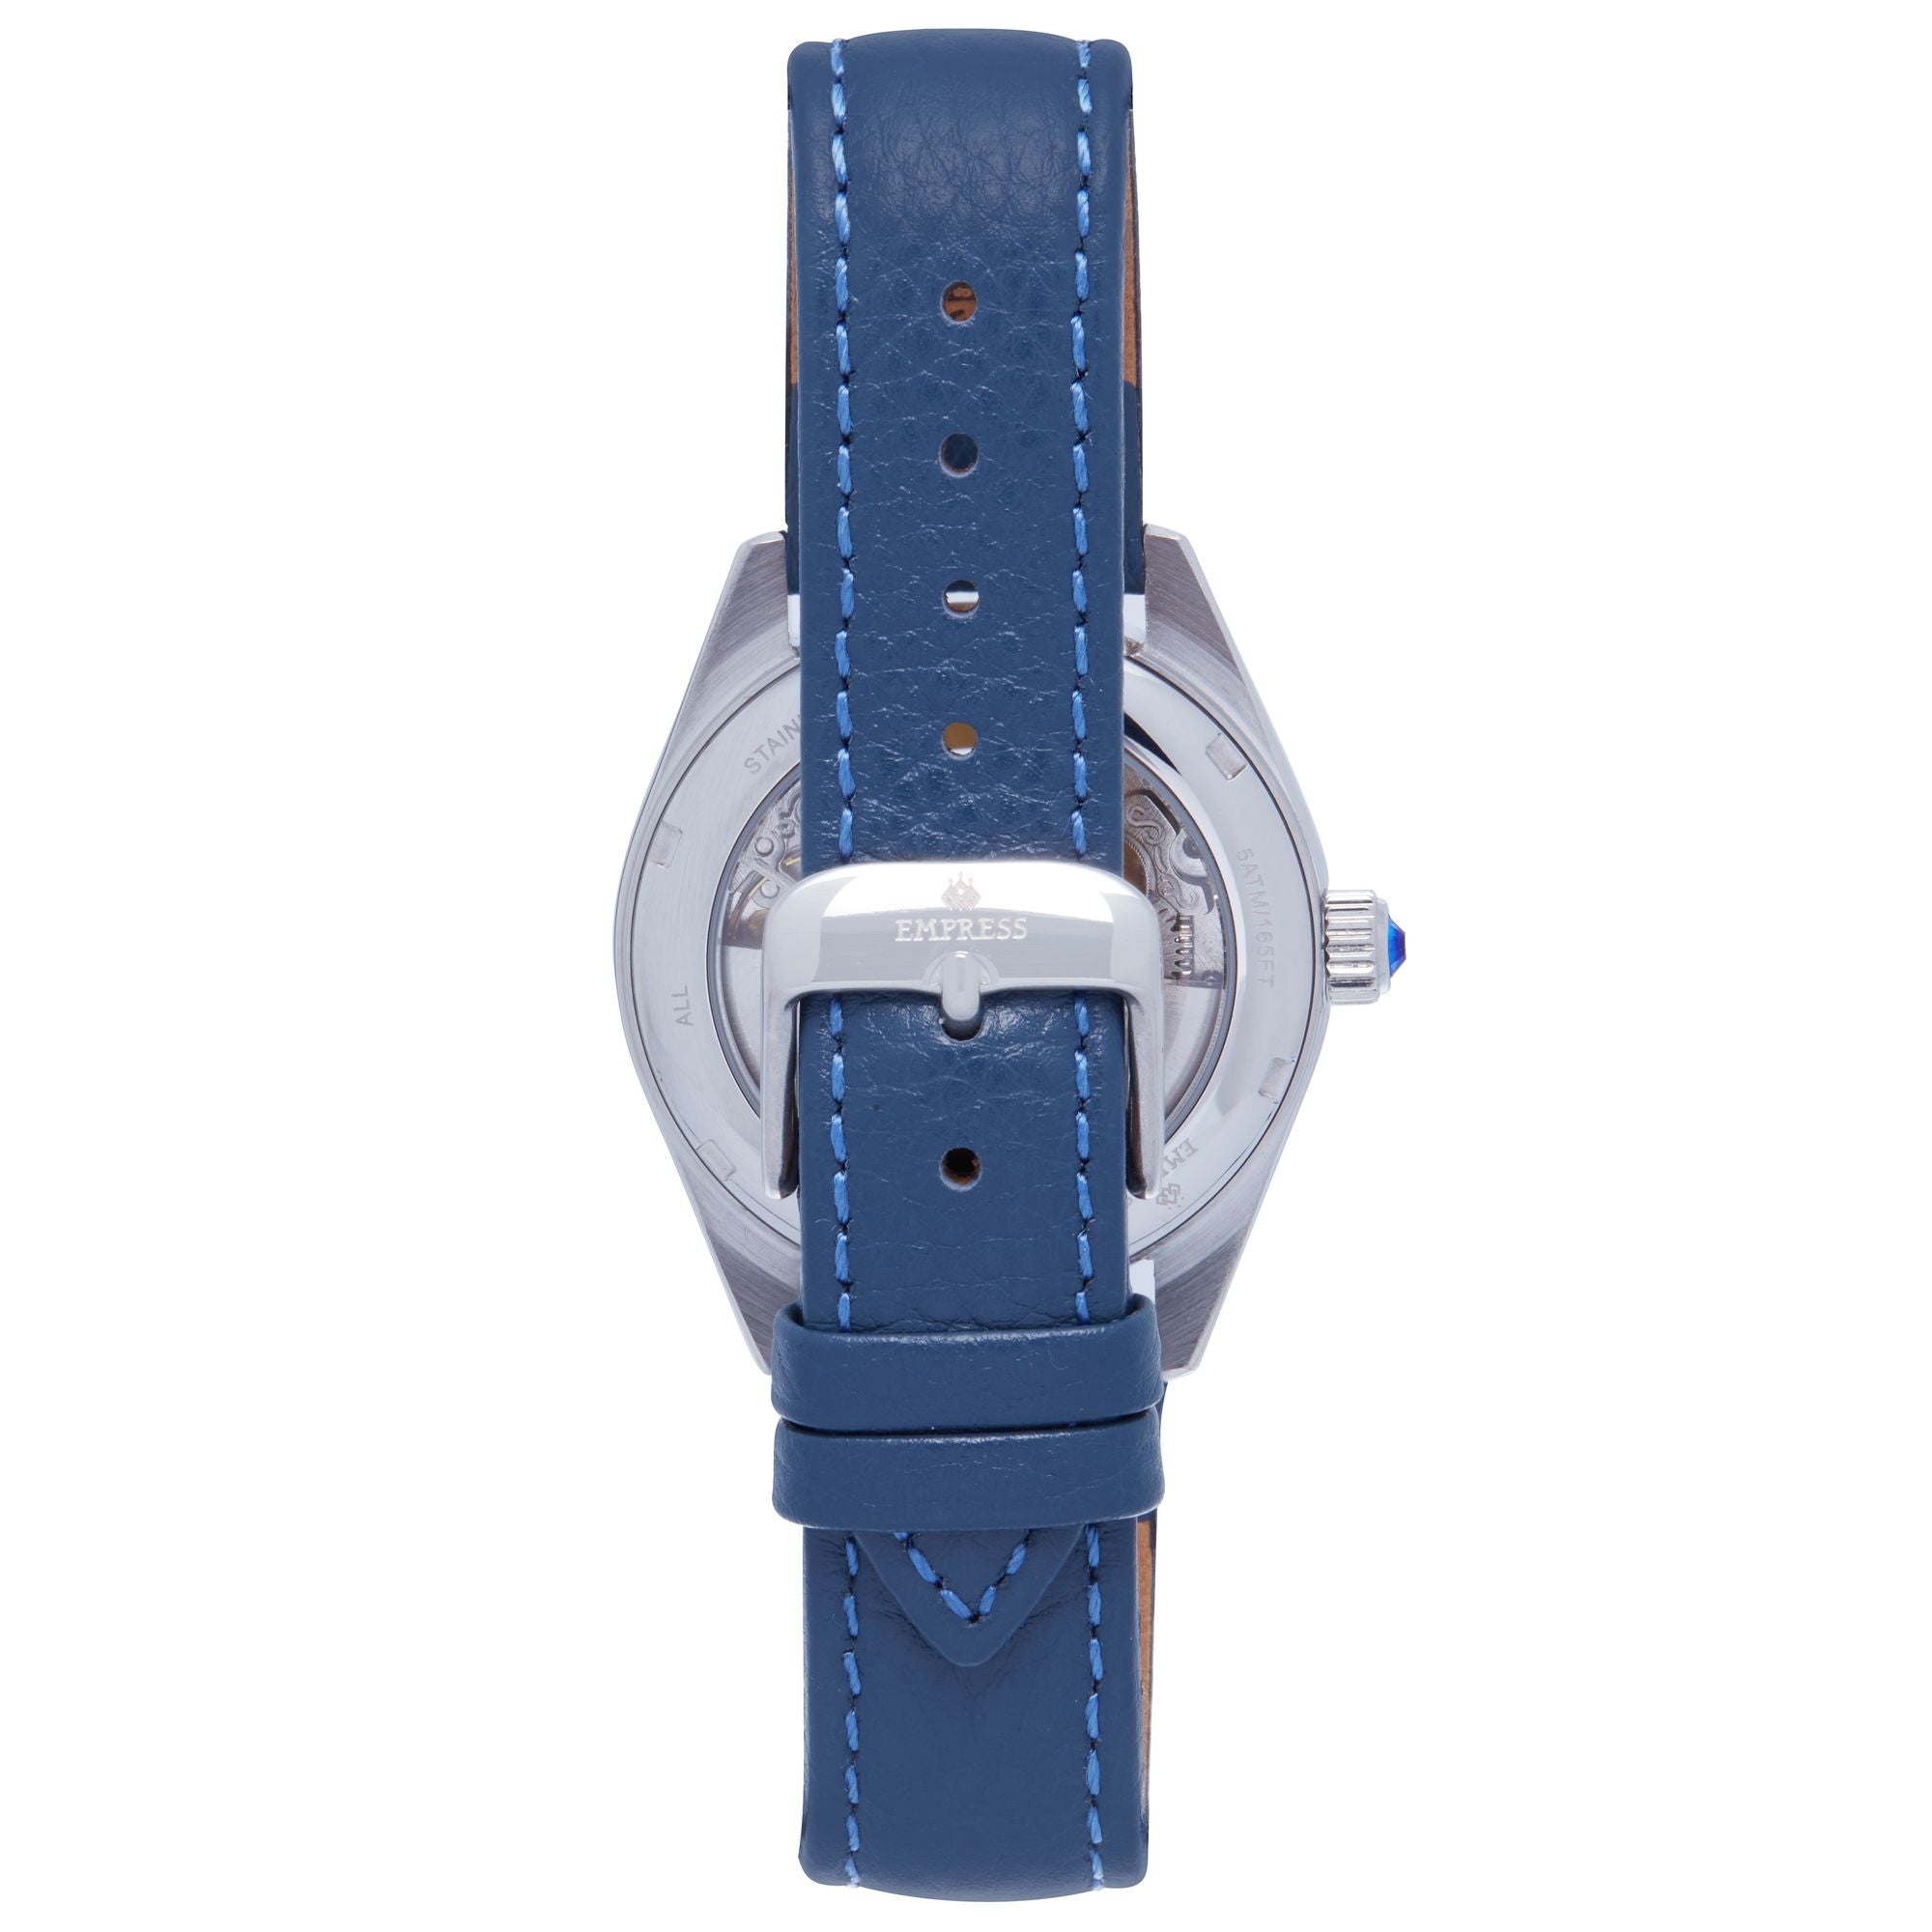 Empress Magnolia Automatic MOP Skeleton Dial Leather-Band Watch - Blue/Silver - EMPEM3604